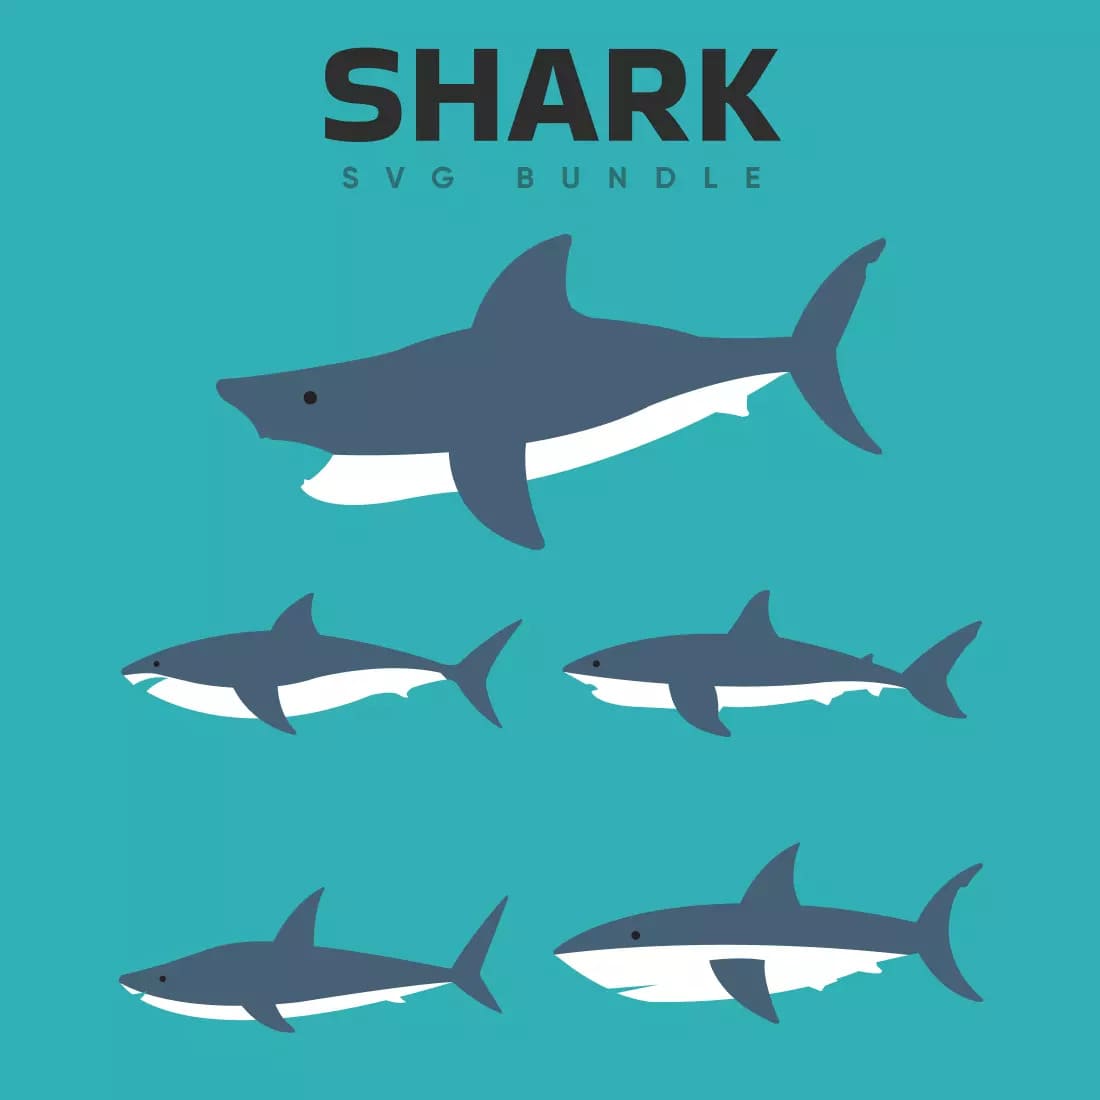 Group of sharks with the words shark svg bundle.